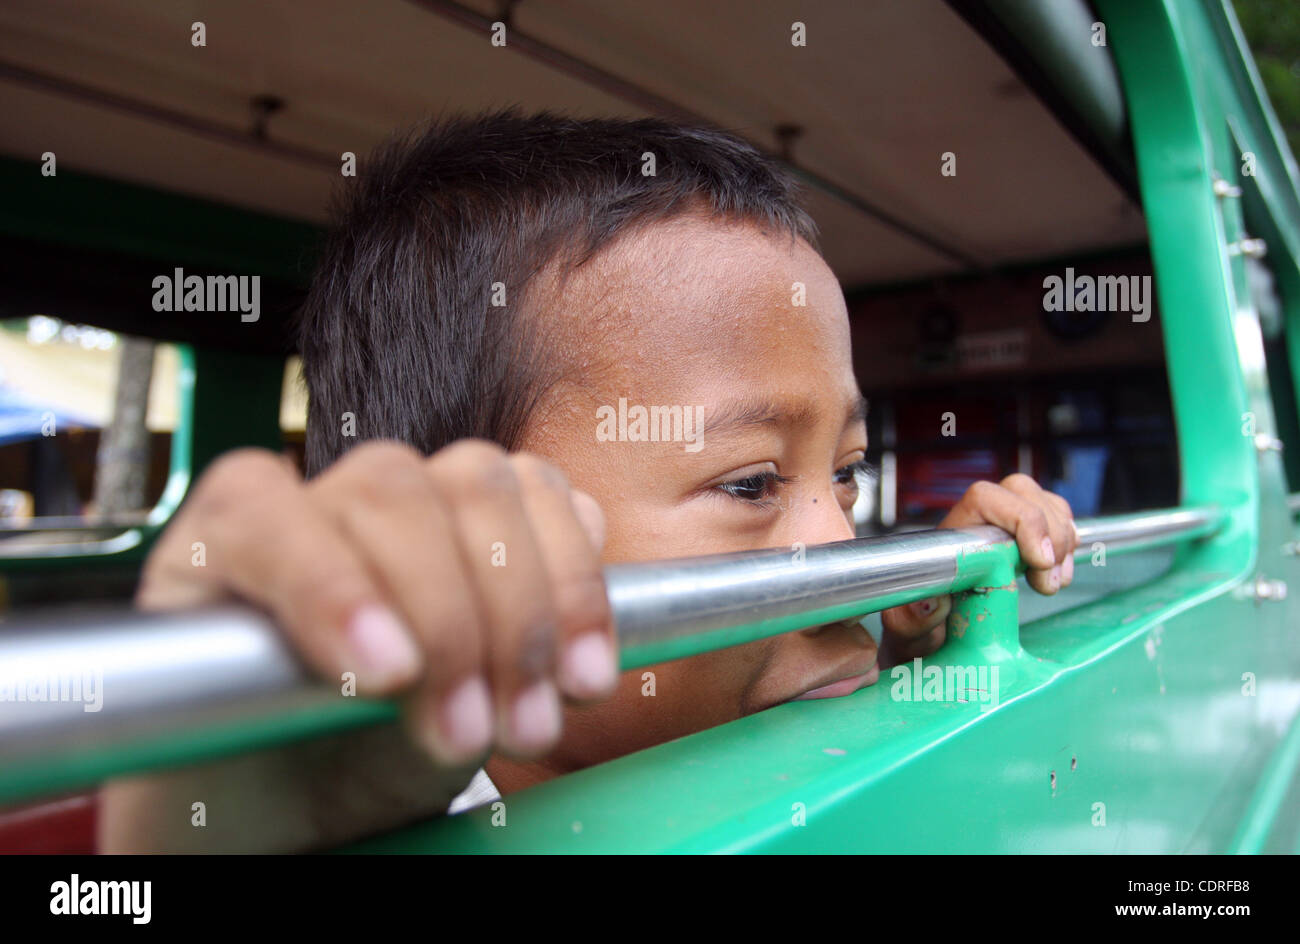 Jul 1, 2011 - Sultan Kudarat, Philippines - A Filipino kid displaced by widespread flash floods is seen in the southern town of Sultan Kudarat in the southern Philippines, Friday. Flood waters in the region caused by the clogging of tons of water lilies subsided but in the city of Davao, flash flood Stock Photo